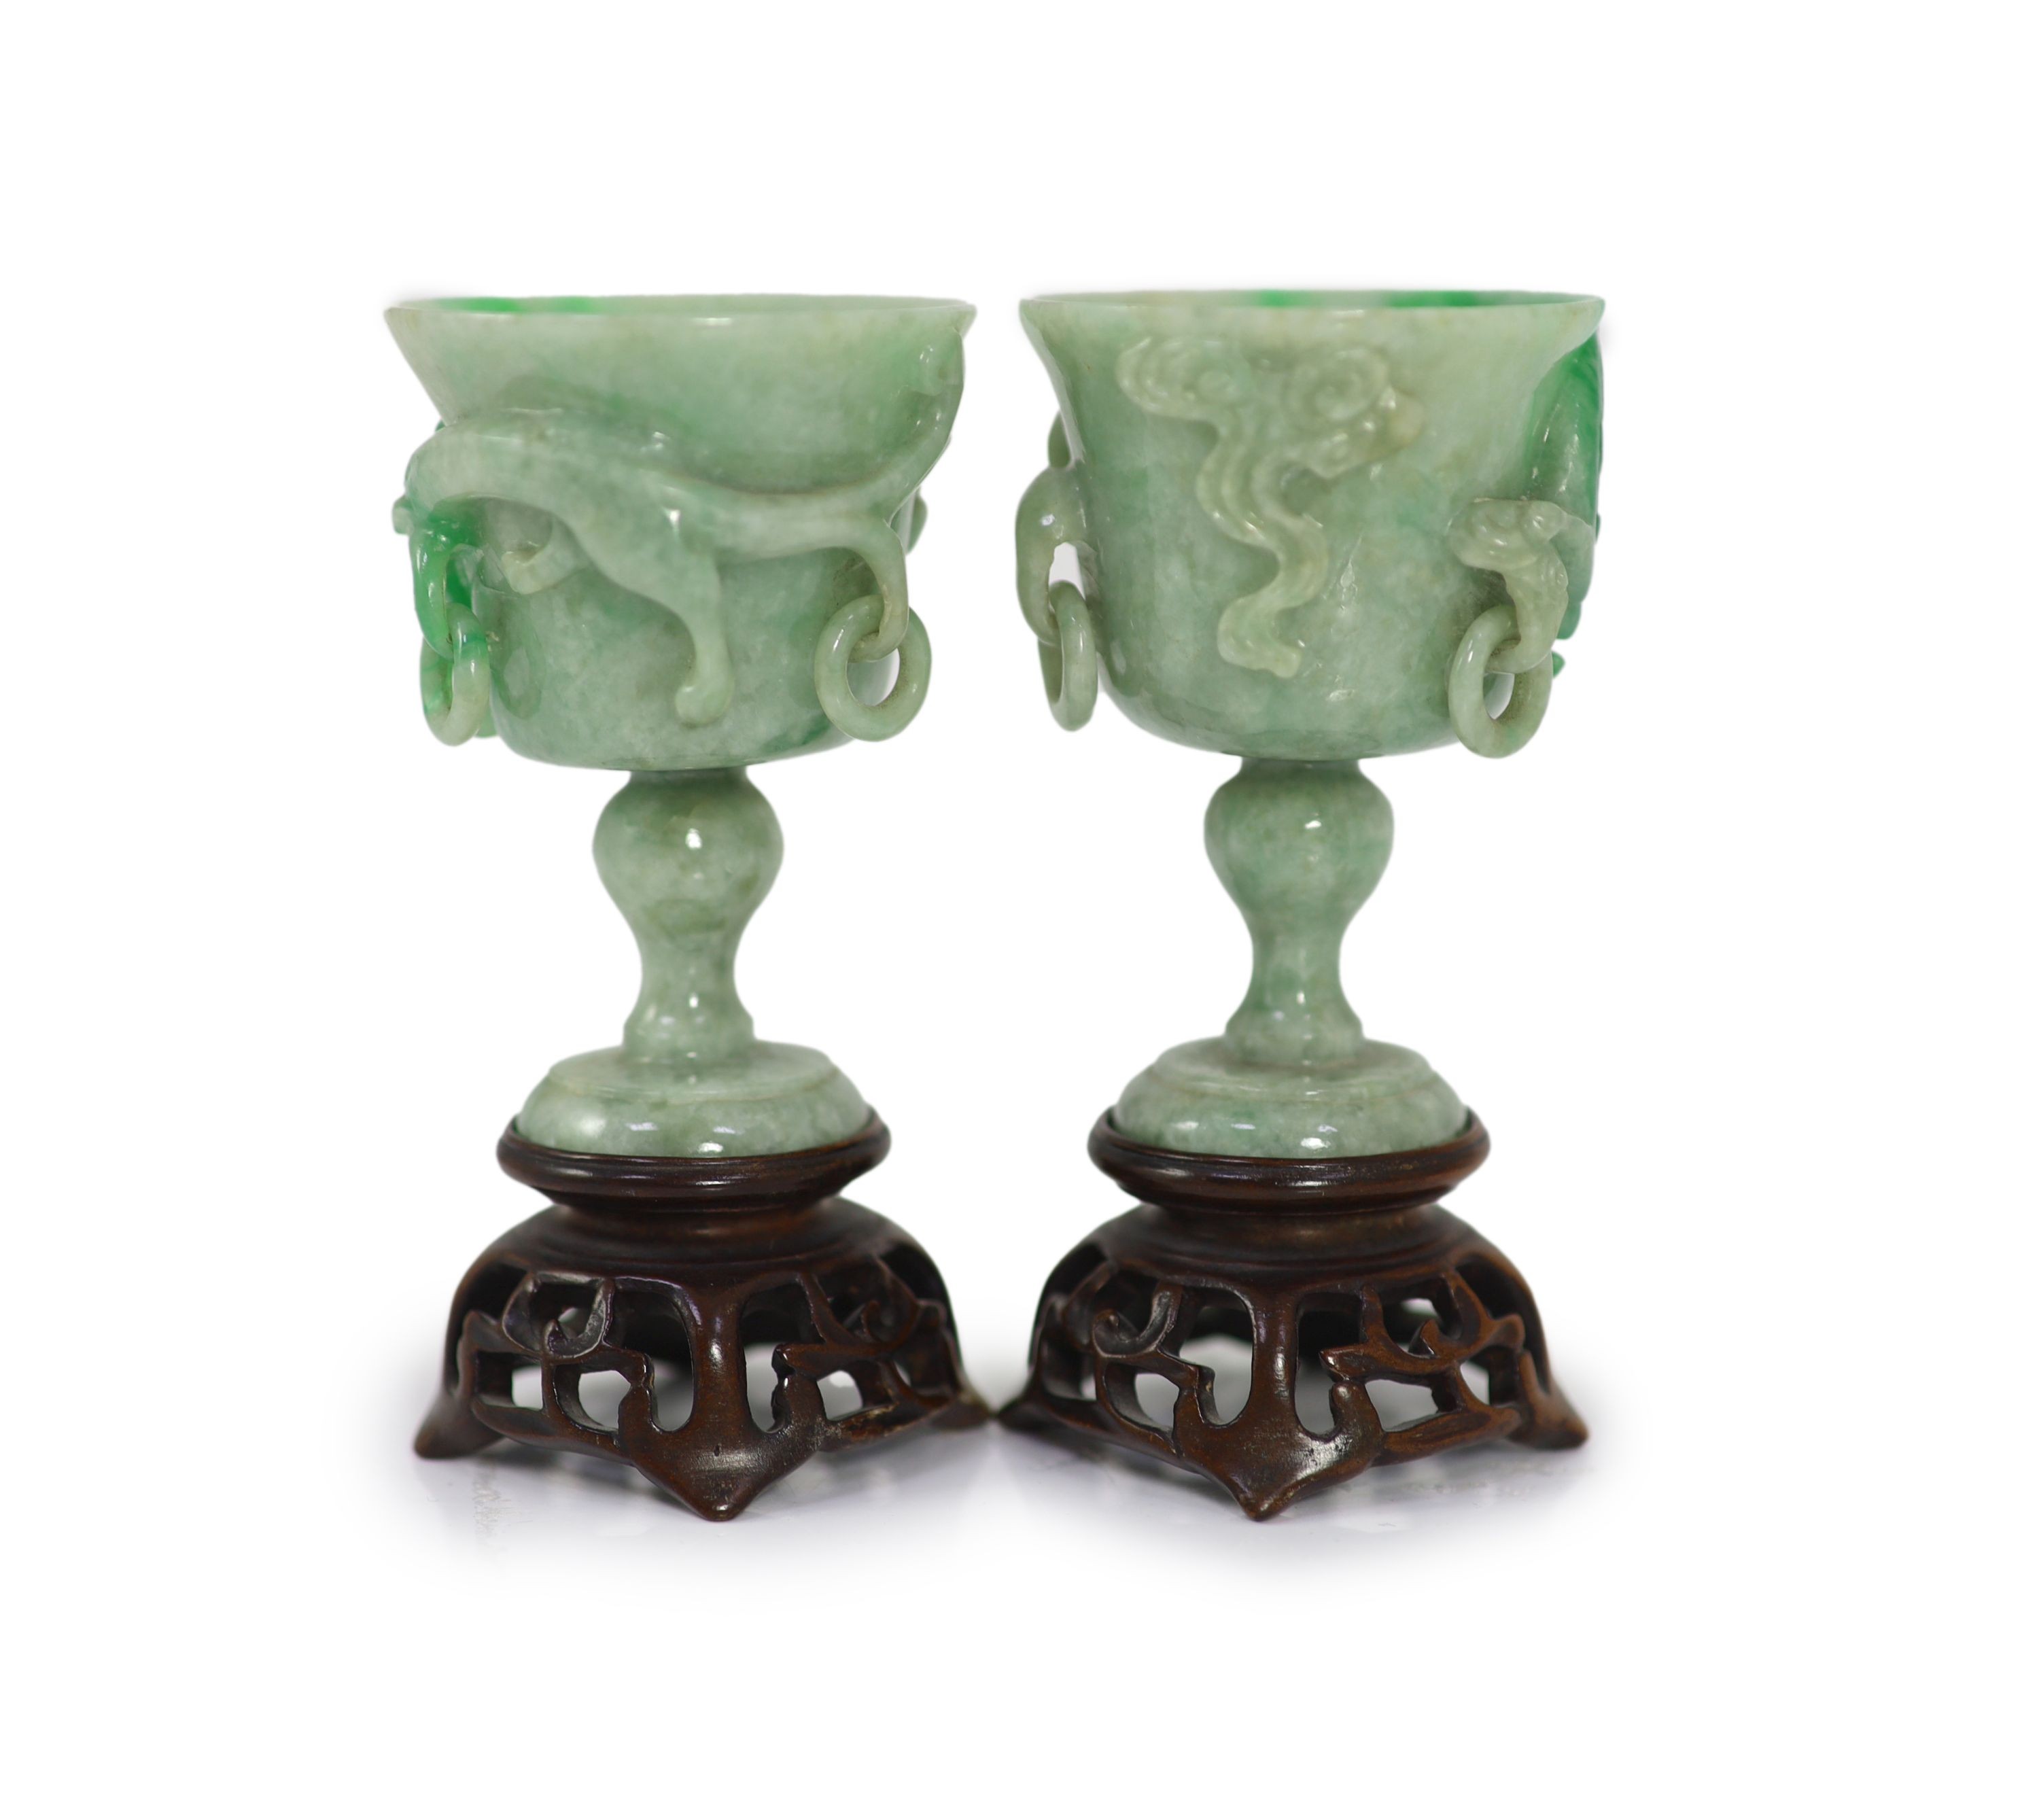 A pair of Chinese small jadeite stem cups, 20th century, 7.2cm high, carved wood stands